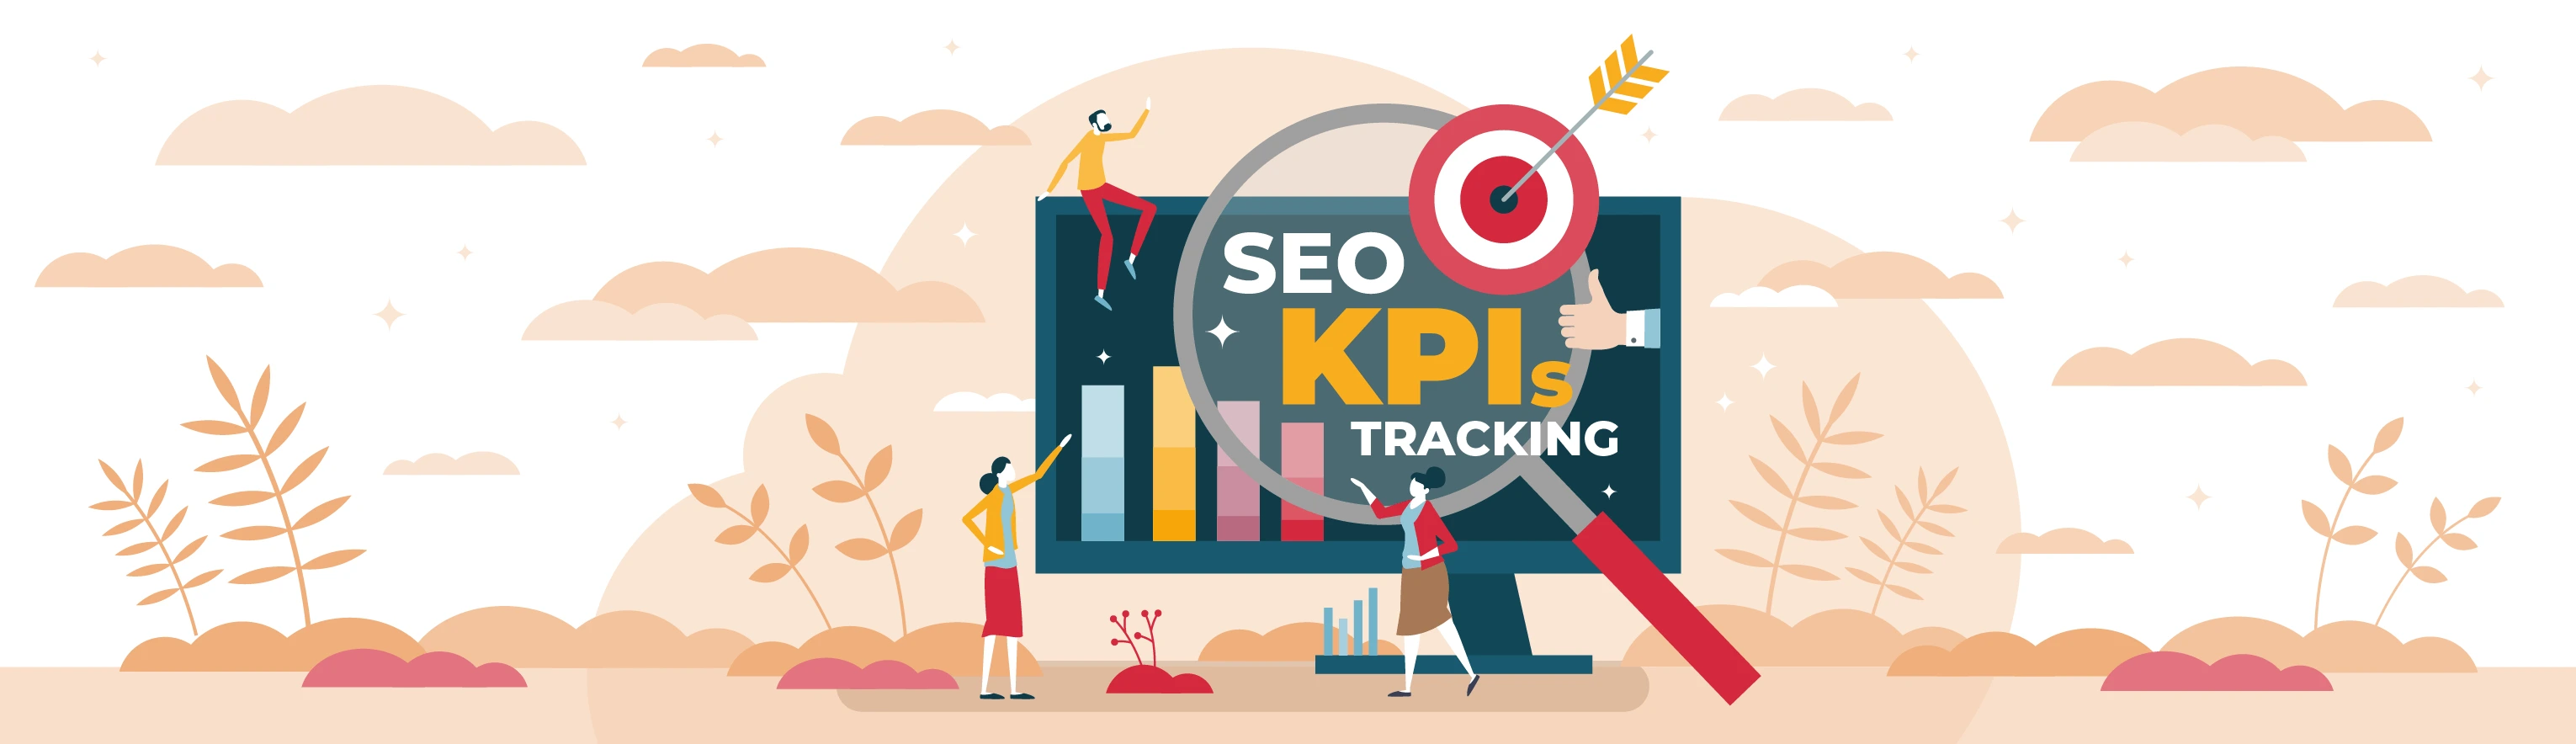 SEO KPIs Made Easy: A Beginner's Guide to Tracking SEO for Marketing Success